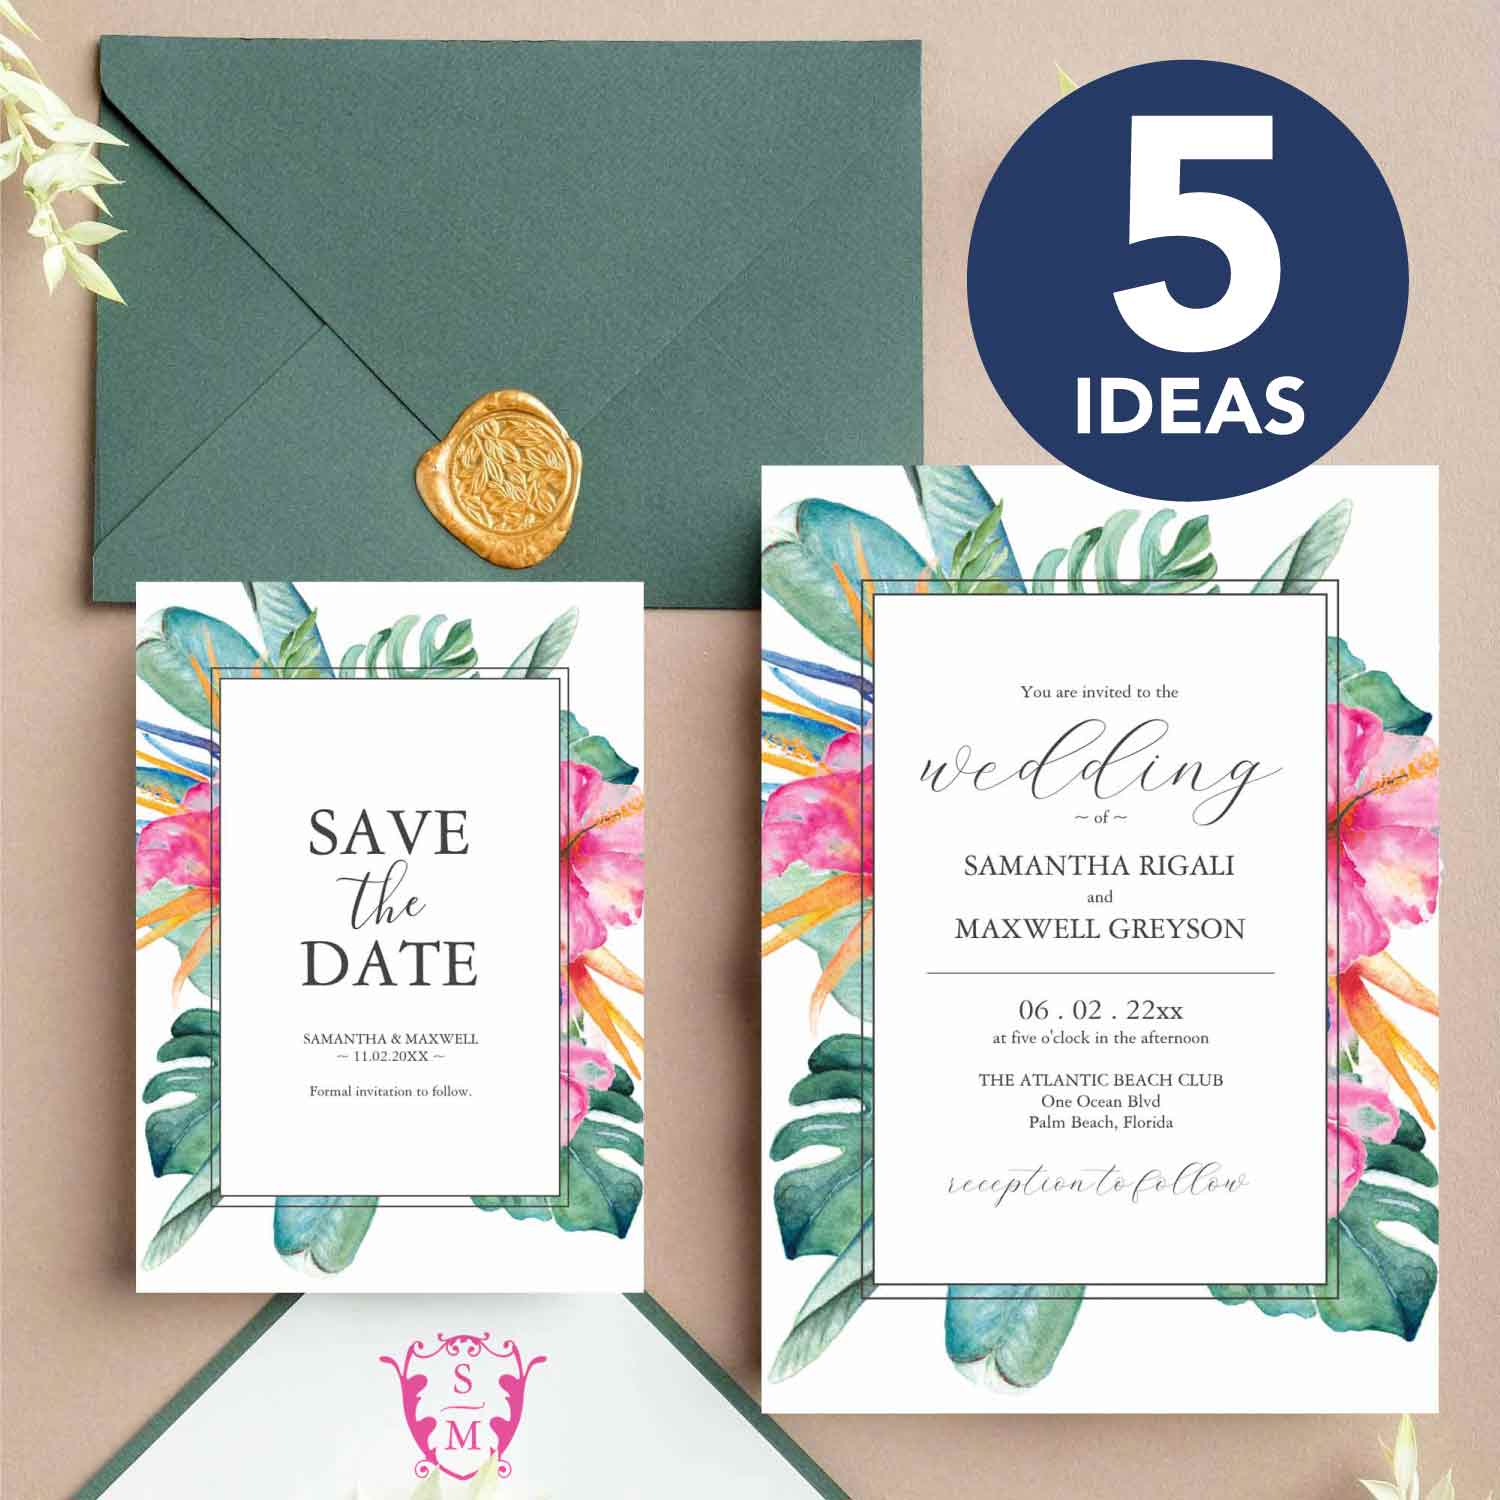 Discover the enchanting world of tropical wedding invitations with our top 5 picks from the 'Do Tell a Belle' collection. Explore stunning designs featuring watercolor pineapples, lush palm leaves, vibrant hibiscus flowers, and serene shorelines to set the perfect tone for your dream beach wedding. Find your inspiration today!